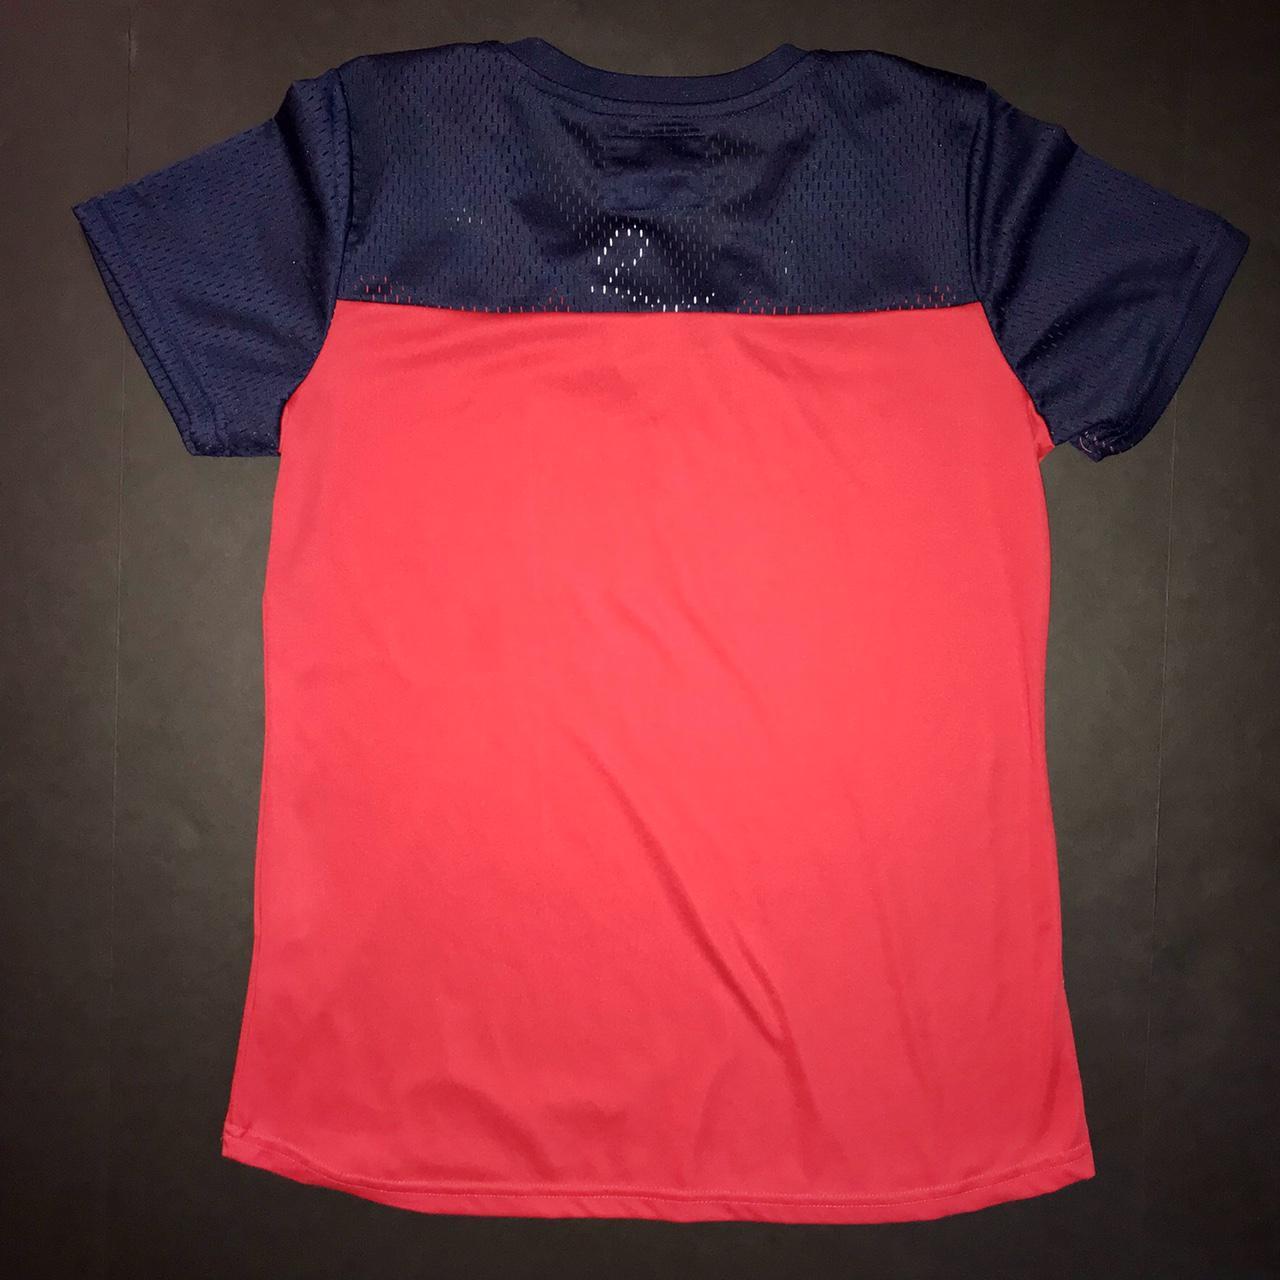 Red, white, and blue jersey style tshirt in a... - Depop